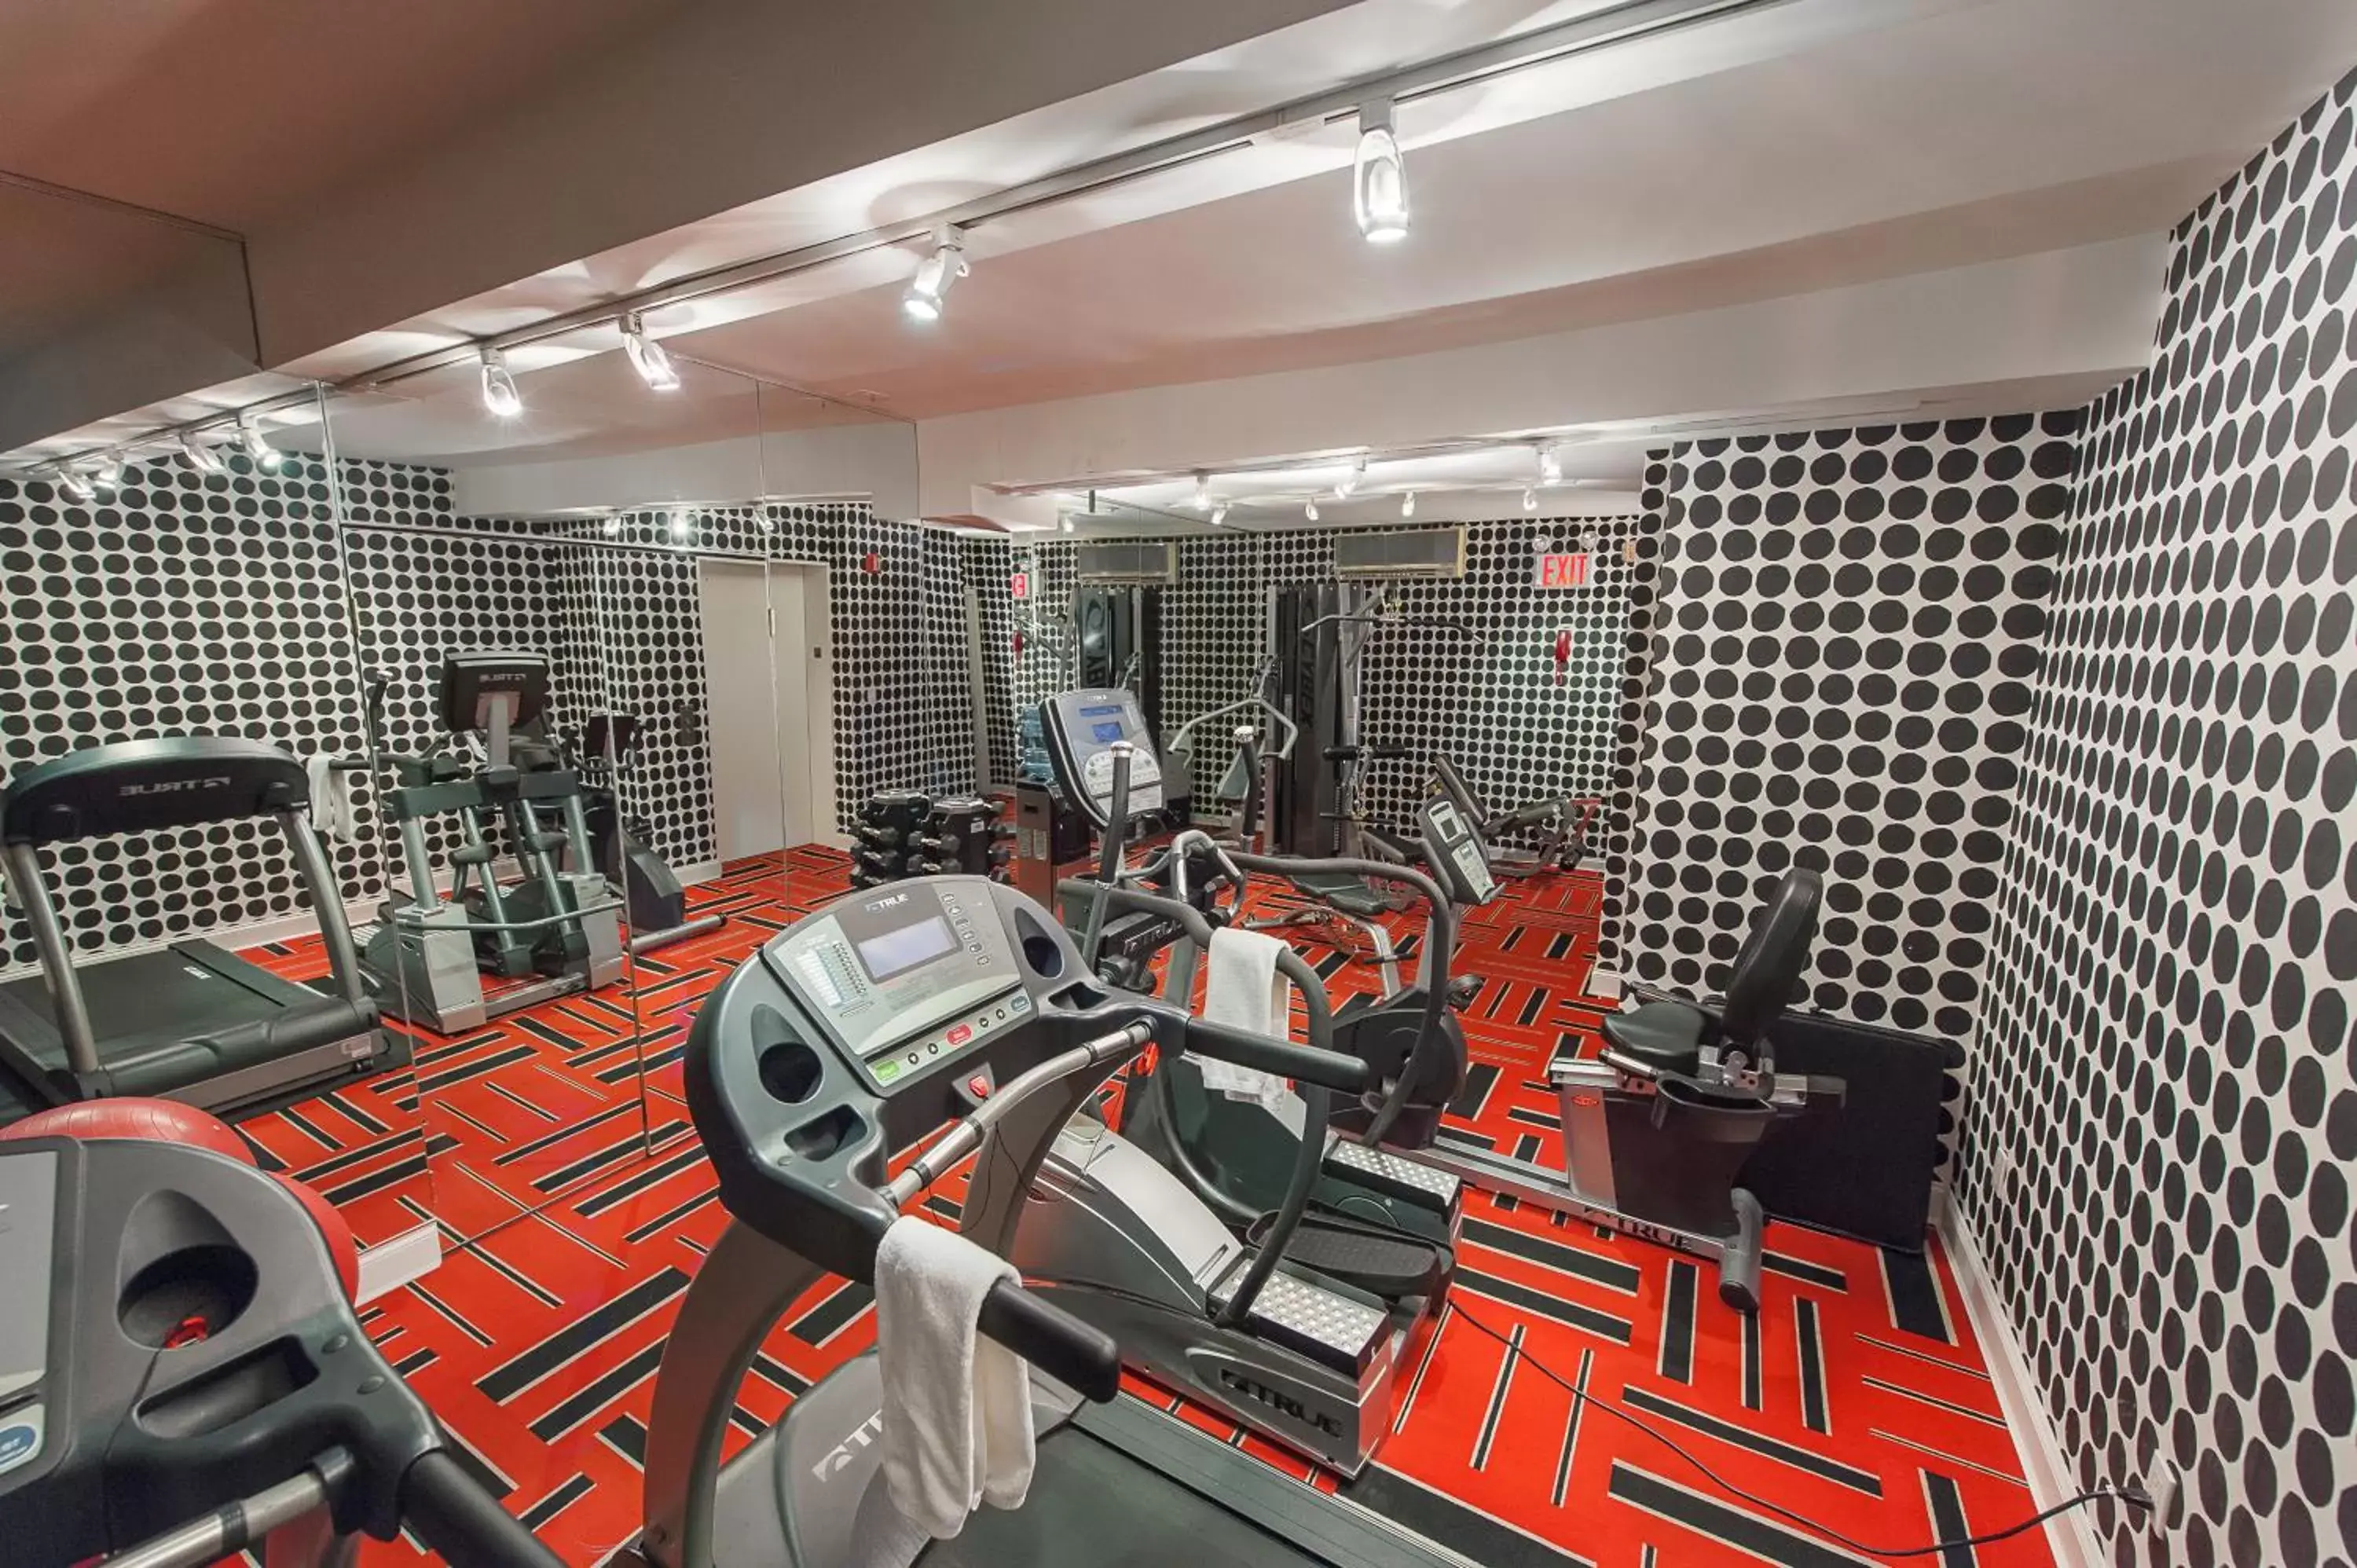 Fitness centre/facilities, Fitness Center/Facilities in Ameritania at Times Square